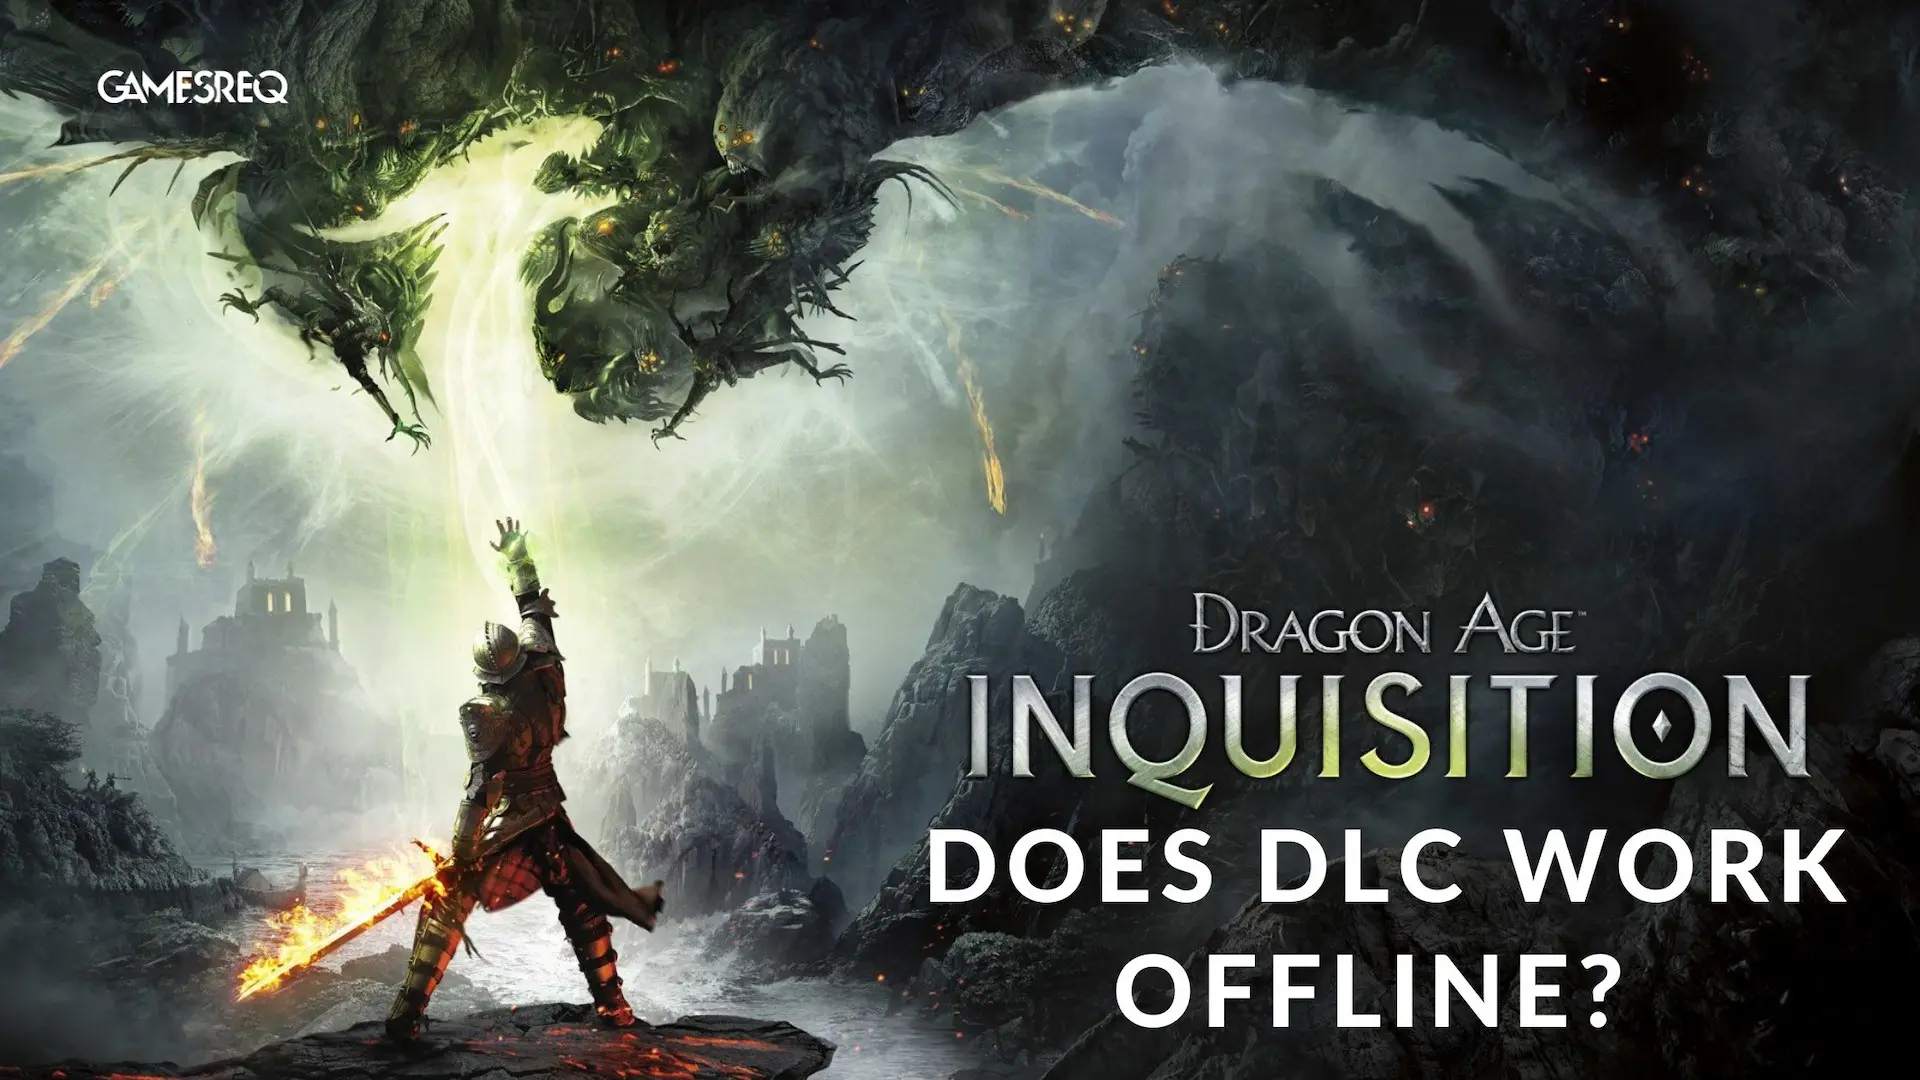 Dragon Age Inquisition Does DLC Work Offline Answered